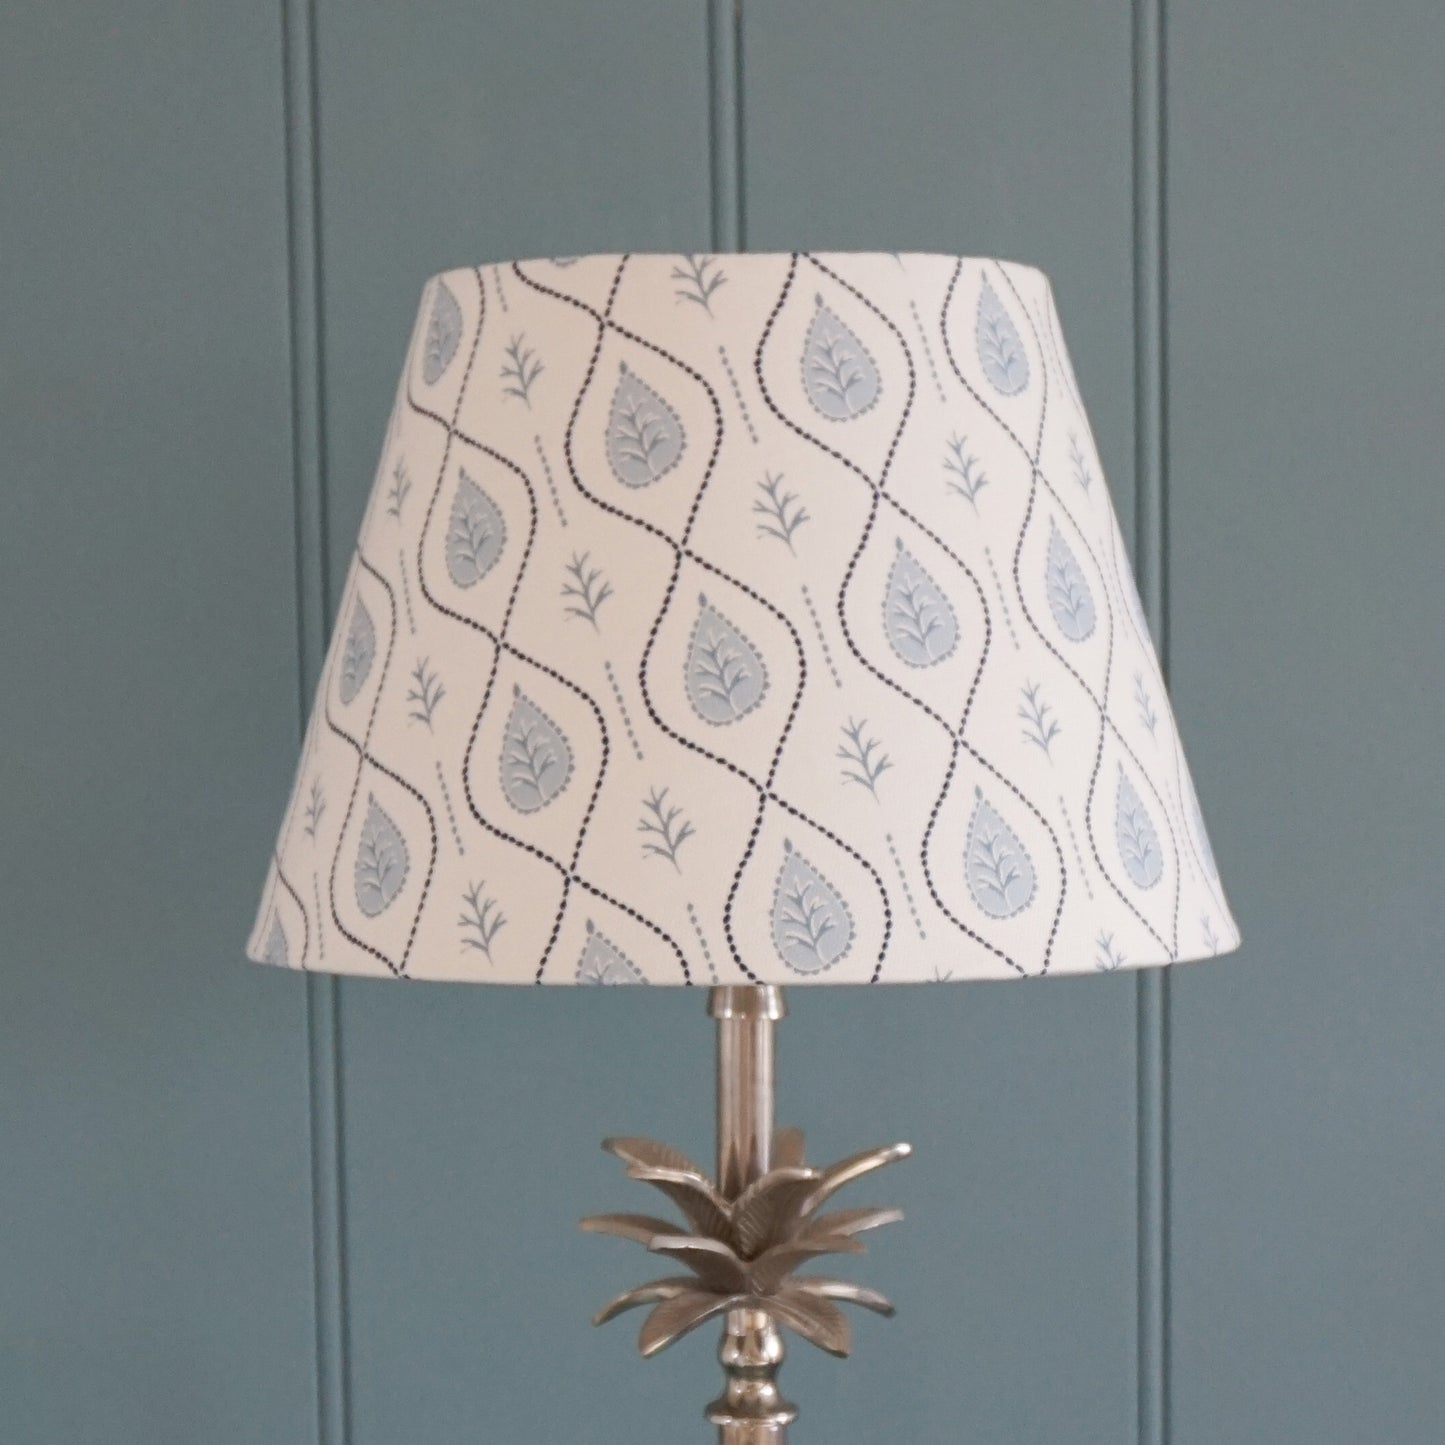 Midi bonded lampshade with rolled edge in Sarah Drayton Molly fabric